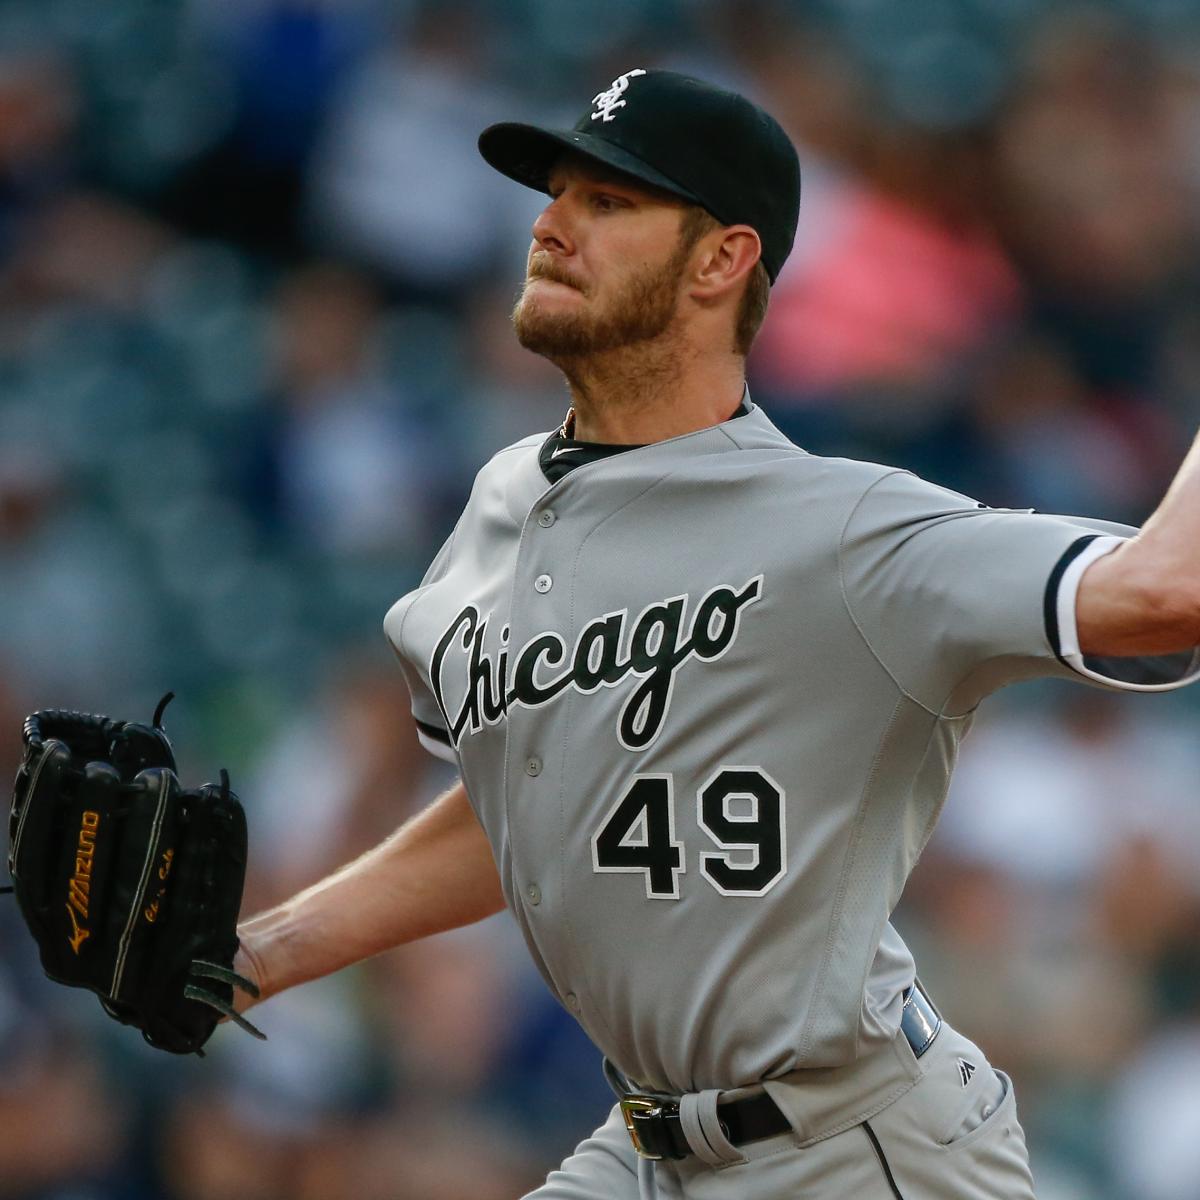 Chris Sale cut up White Sox uniforms as they hurt 'winning mentality', Chicago  White Sox